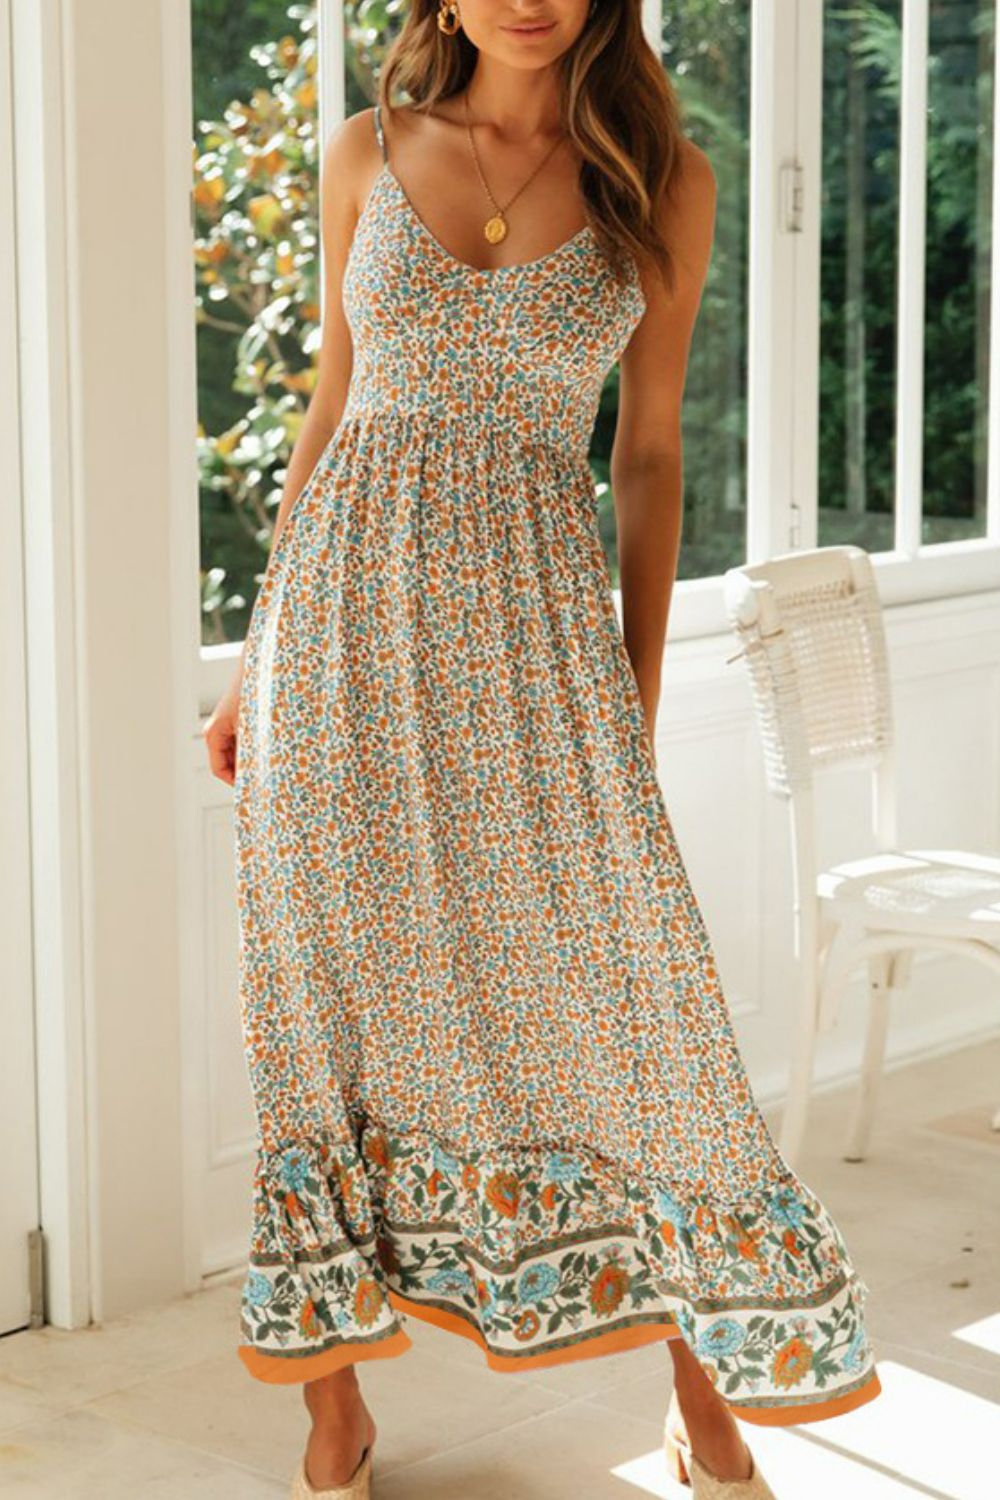 Bohemian Spaghetti Strap Summer Dress - cream maxi dress boho with floral print and a v neck.  #Firefly Lane Boutique1